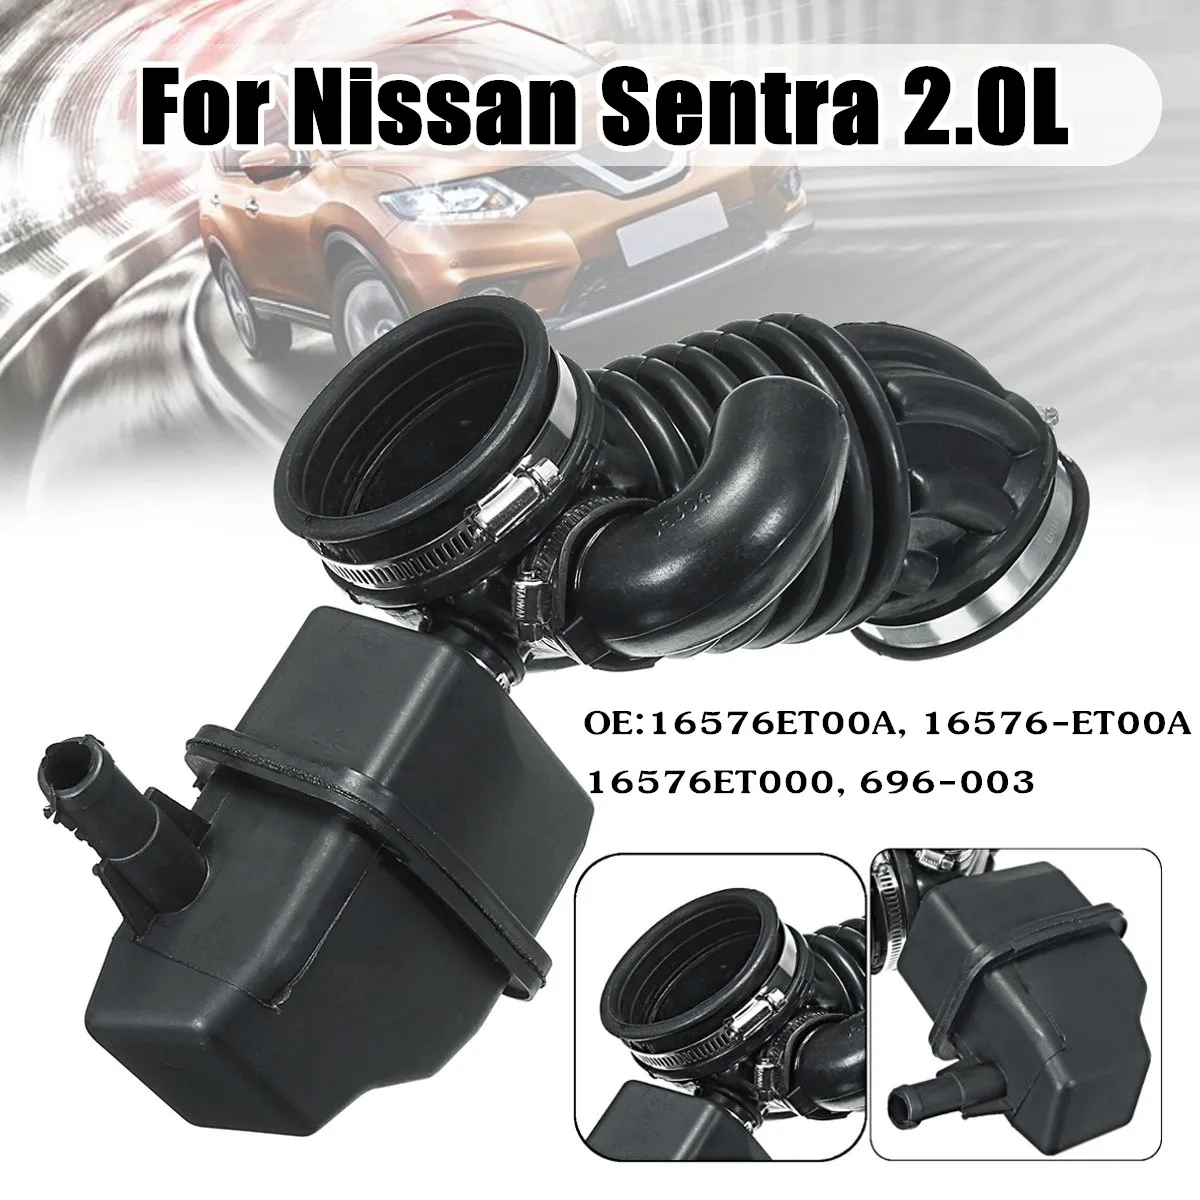 NEW Air Intake Hose Intake Duct Tube Boot for 2007 2008 2009 2010 2011 2012 Nissan Sentra 2.0L Replaces # 16576-ET000 696-003 16576-ET00A 